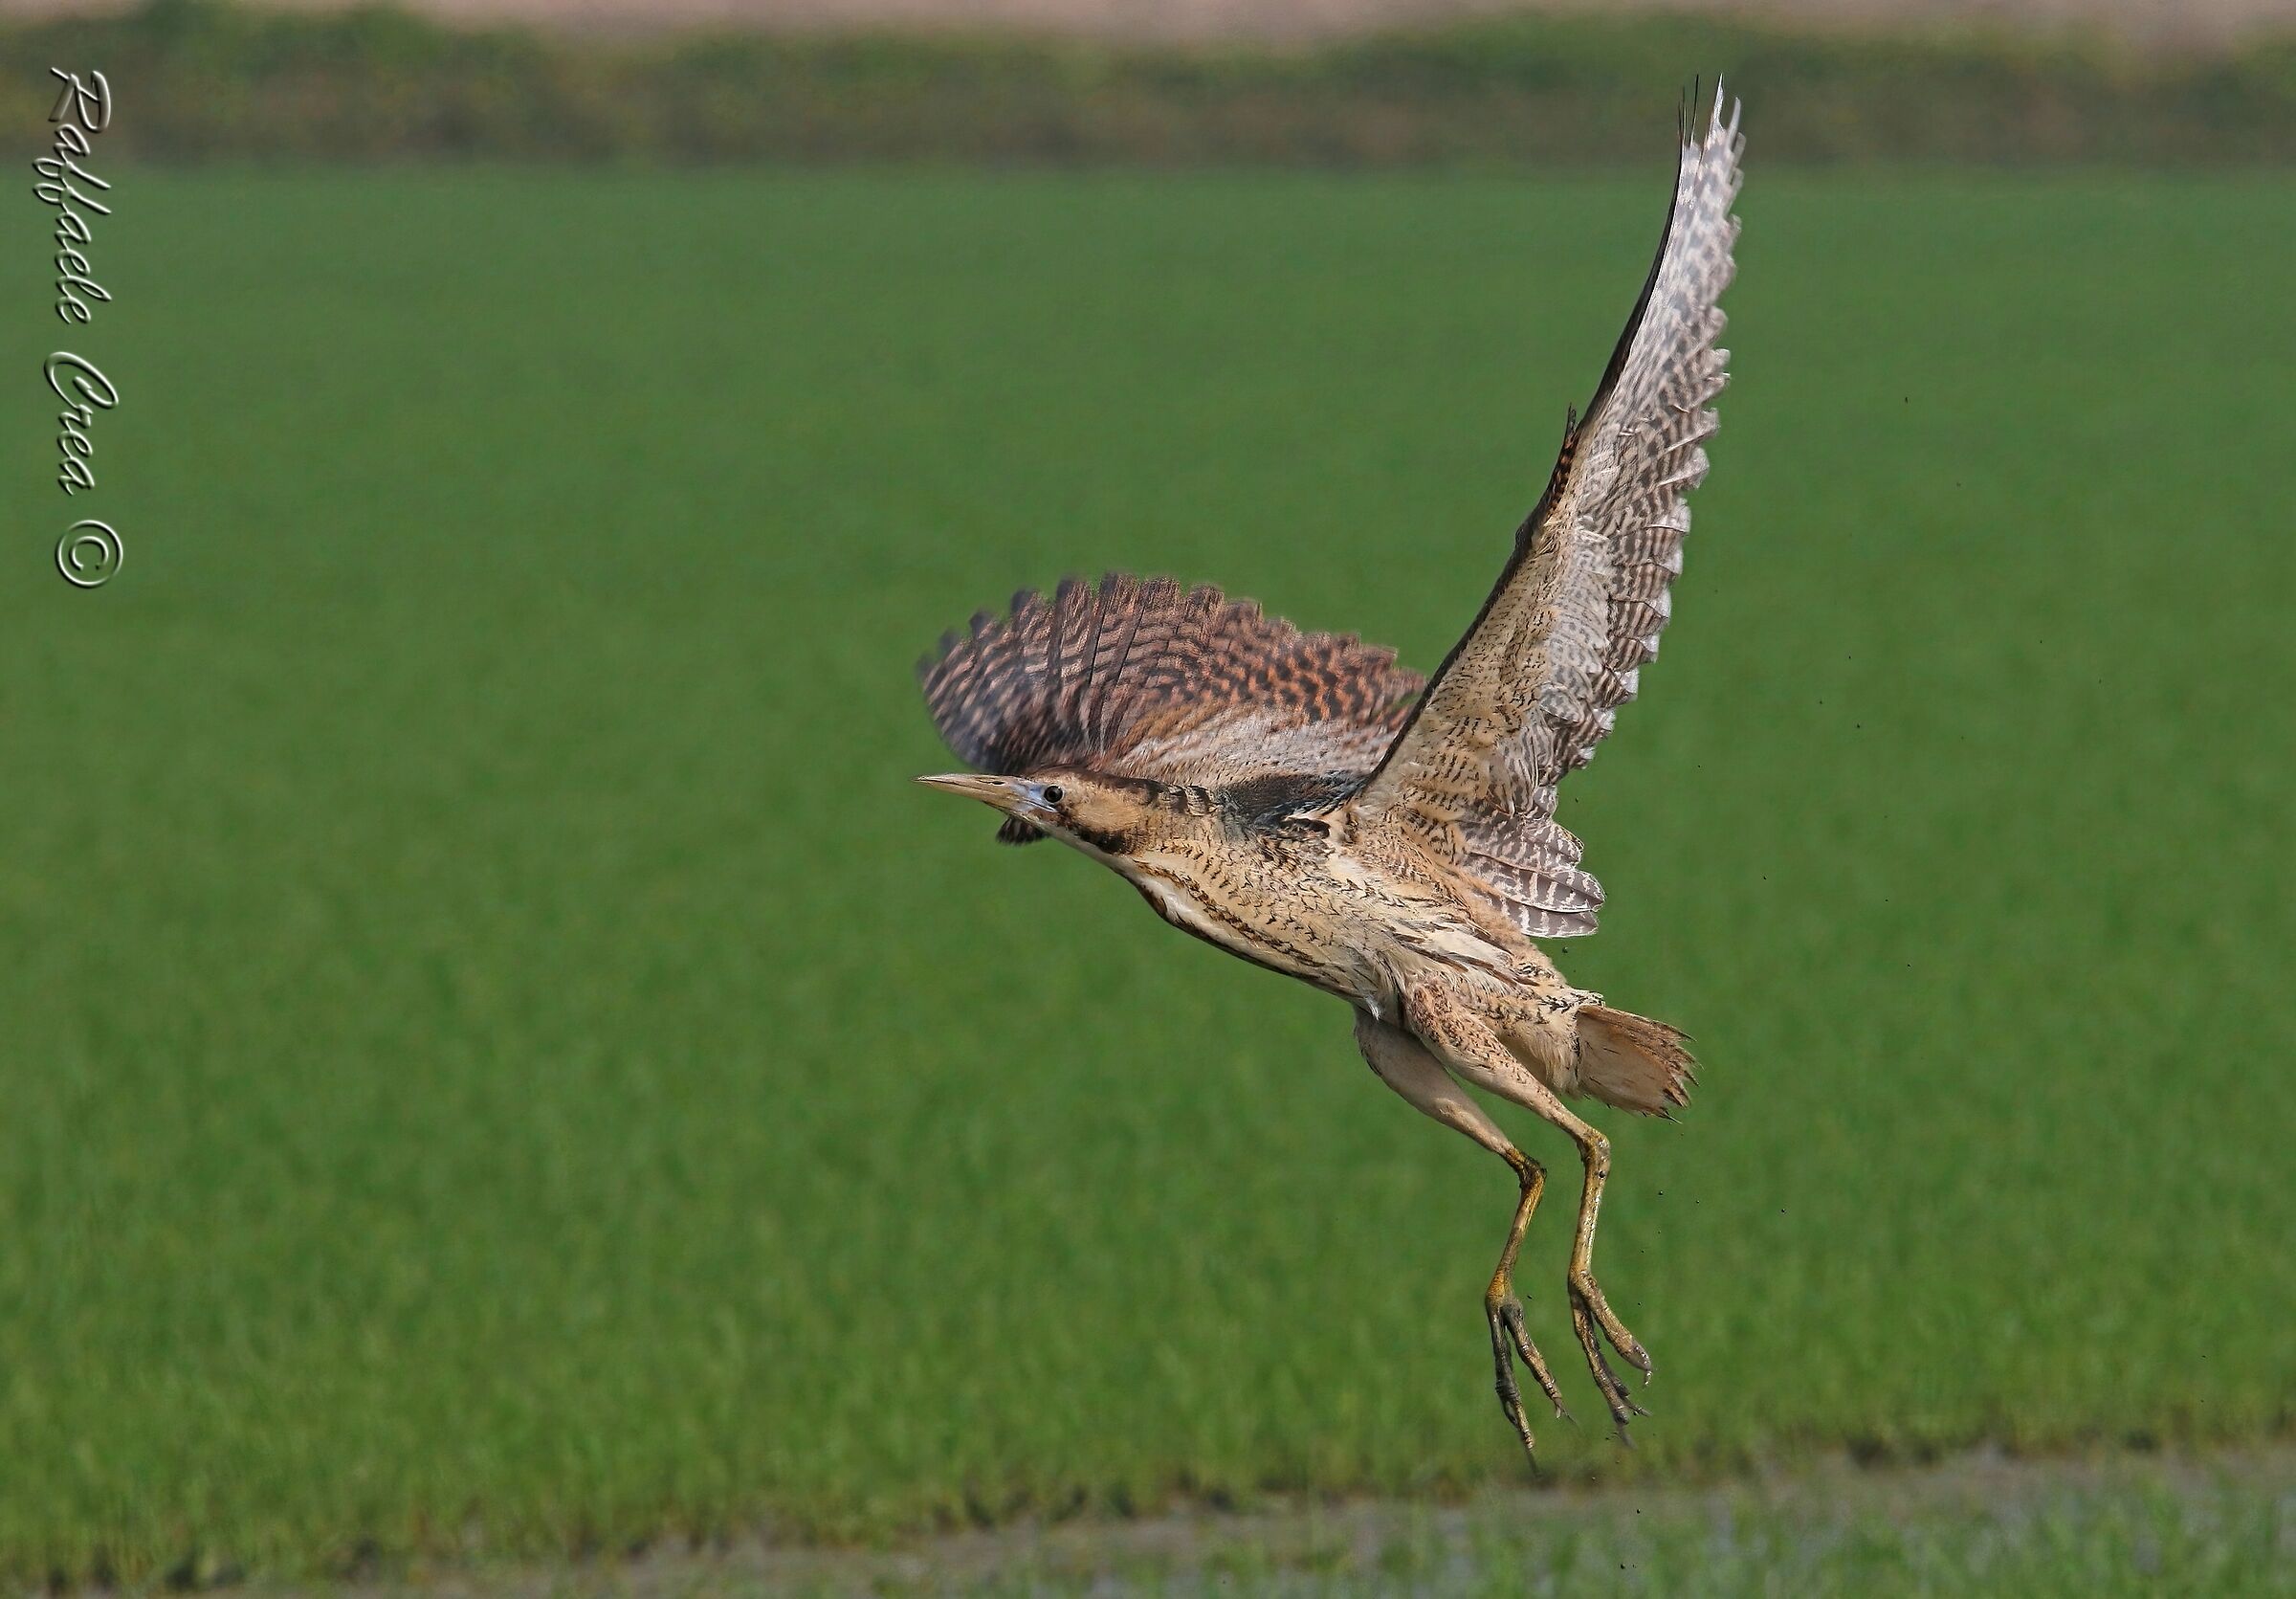 The flight of the bittern in the paddy field...